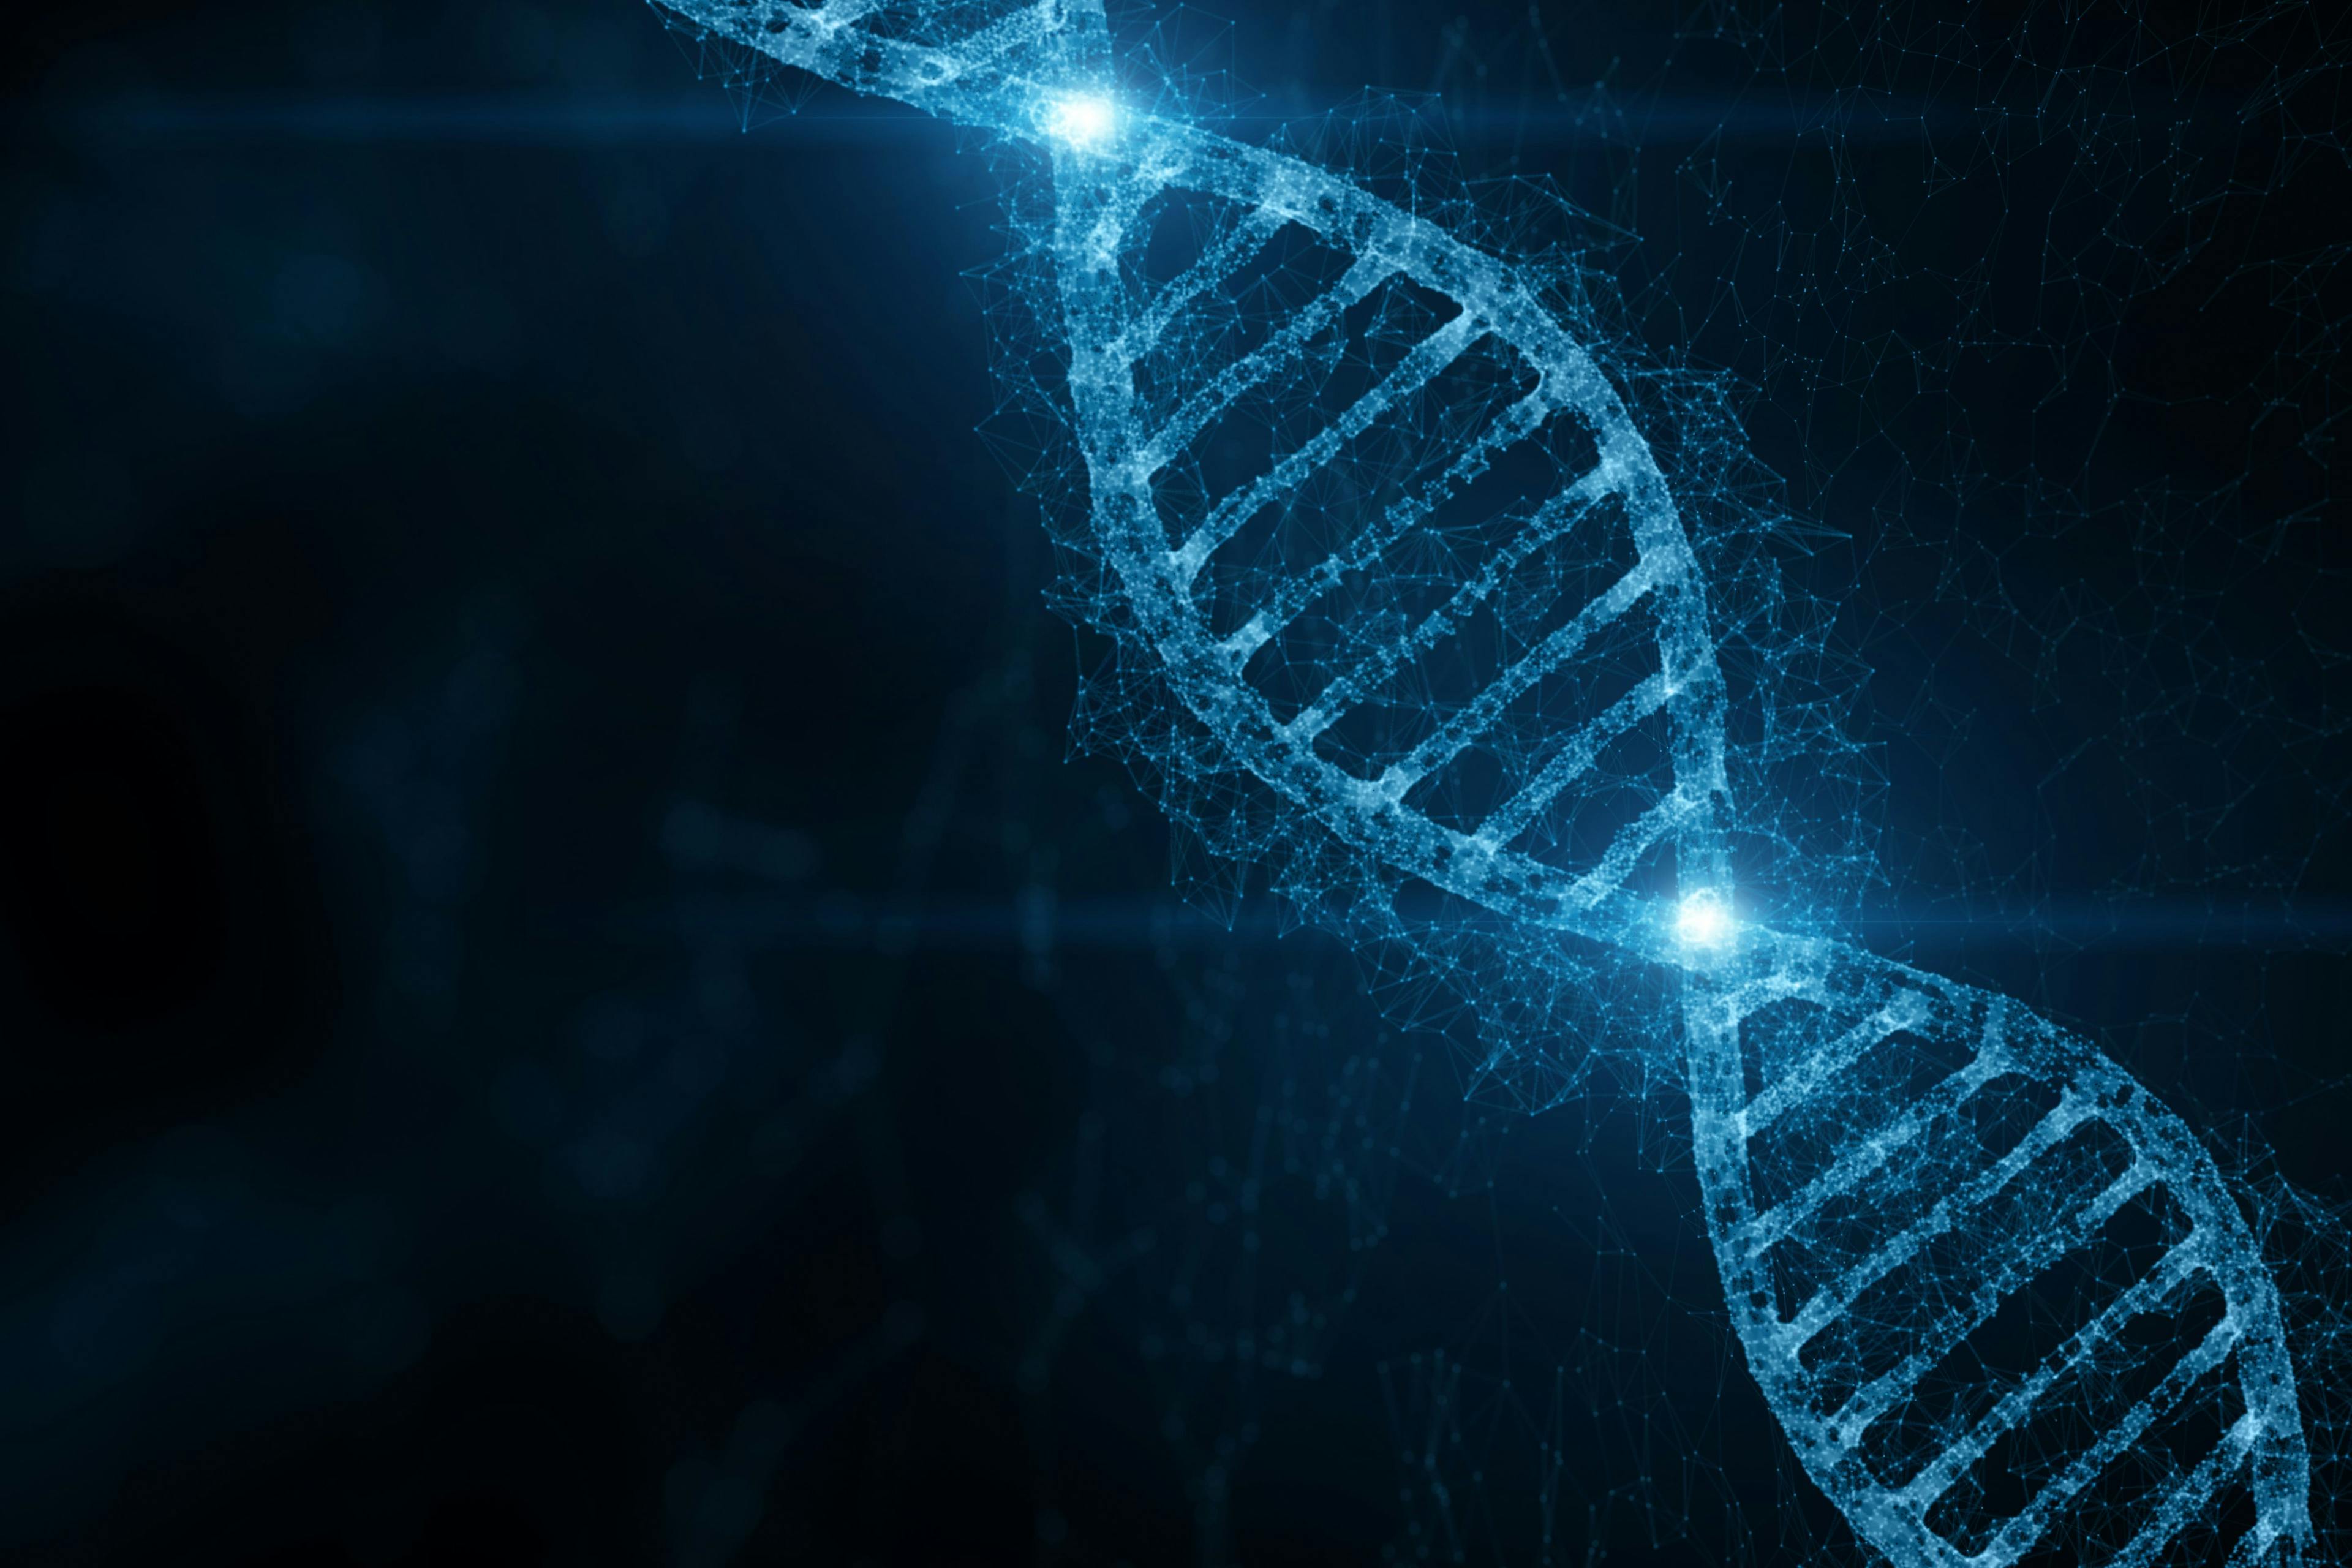 Abstract blue colored shiny dna molecule on futuristic digital illustration background. | Image Credit: © robsonphoto - stock.adobe.com